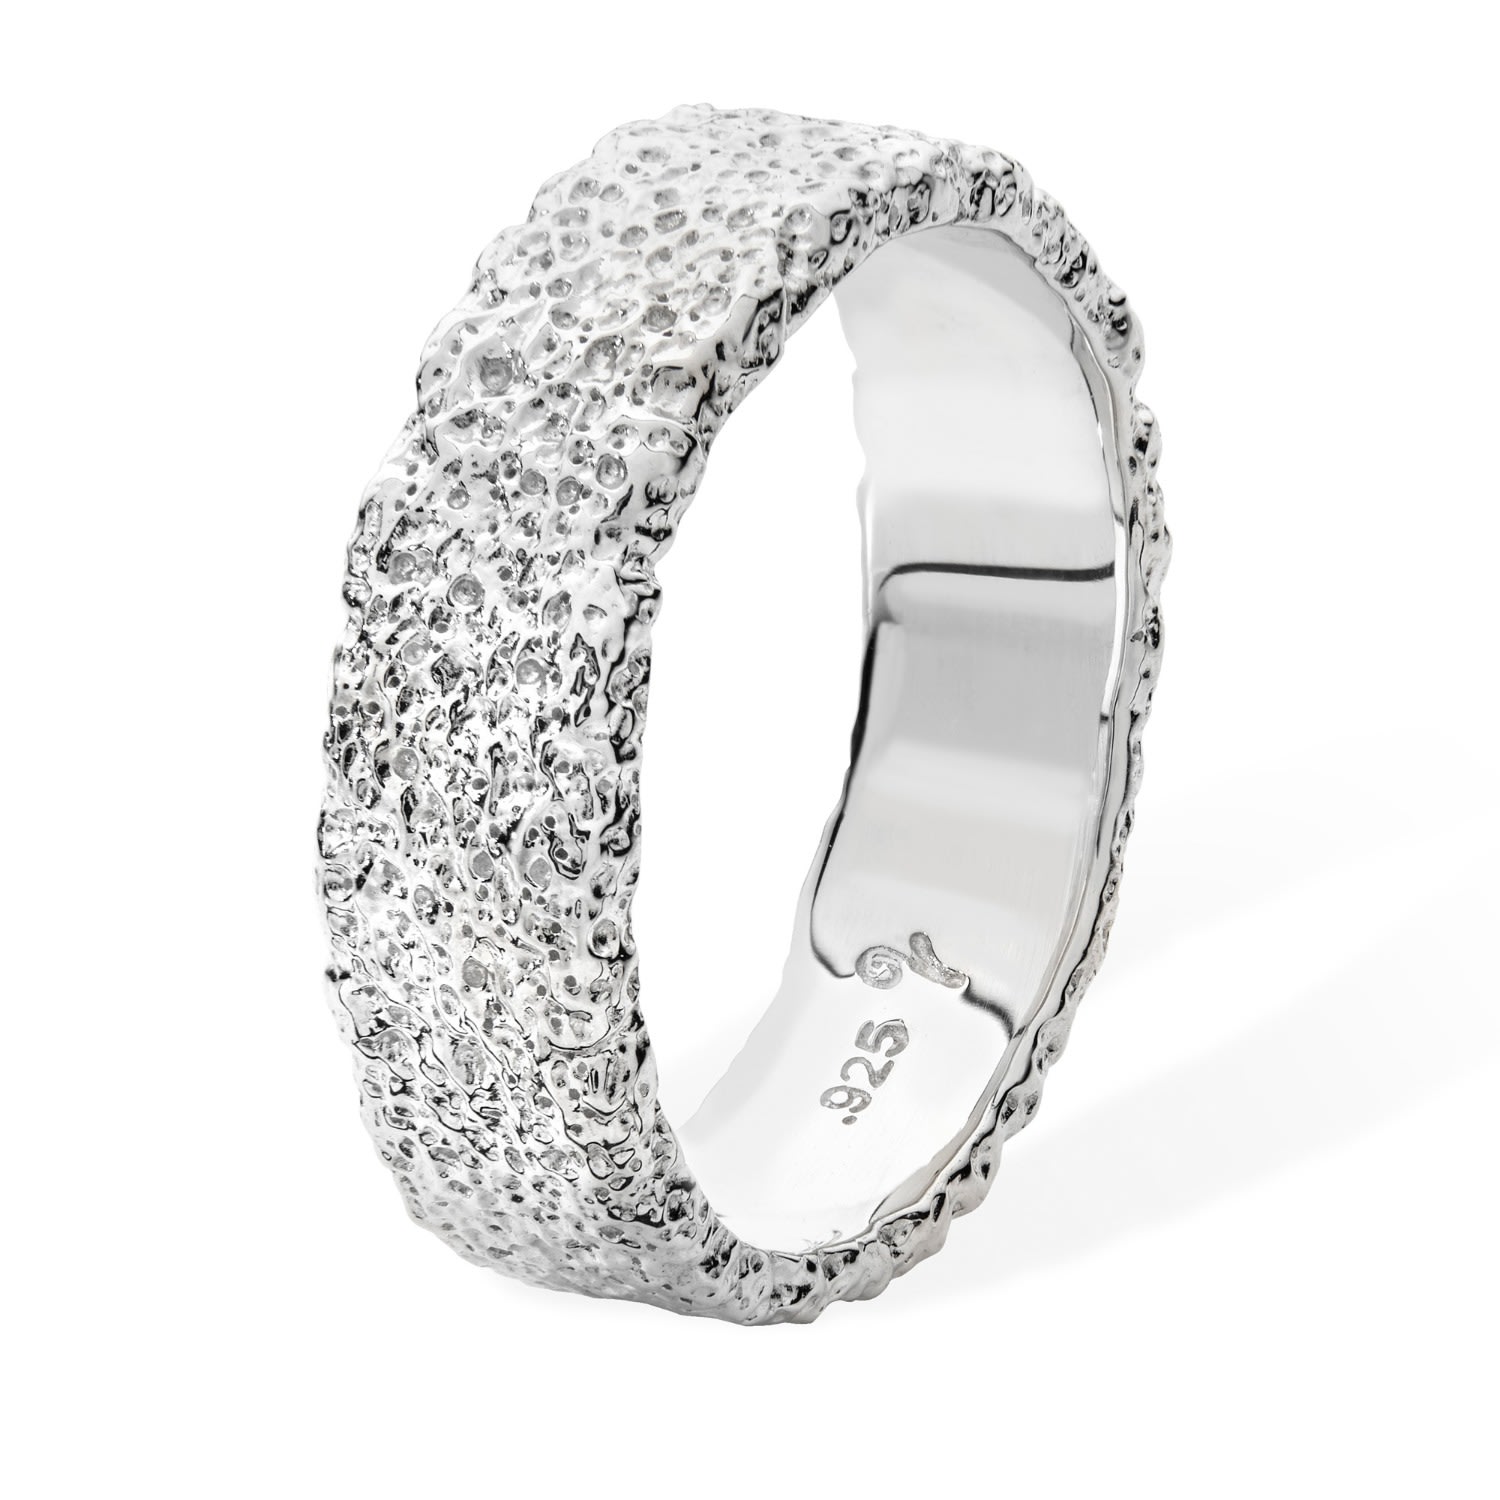 Lucy Quartermaine Women's Silver Middle Hula Ring In Metallic